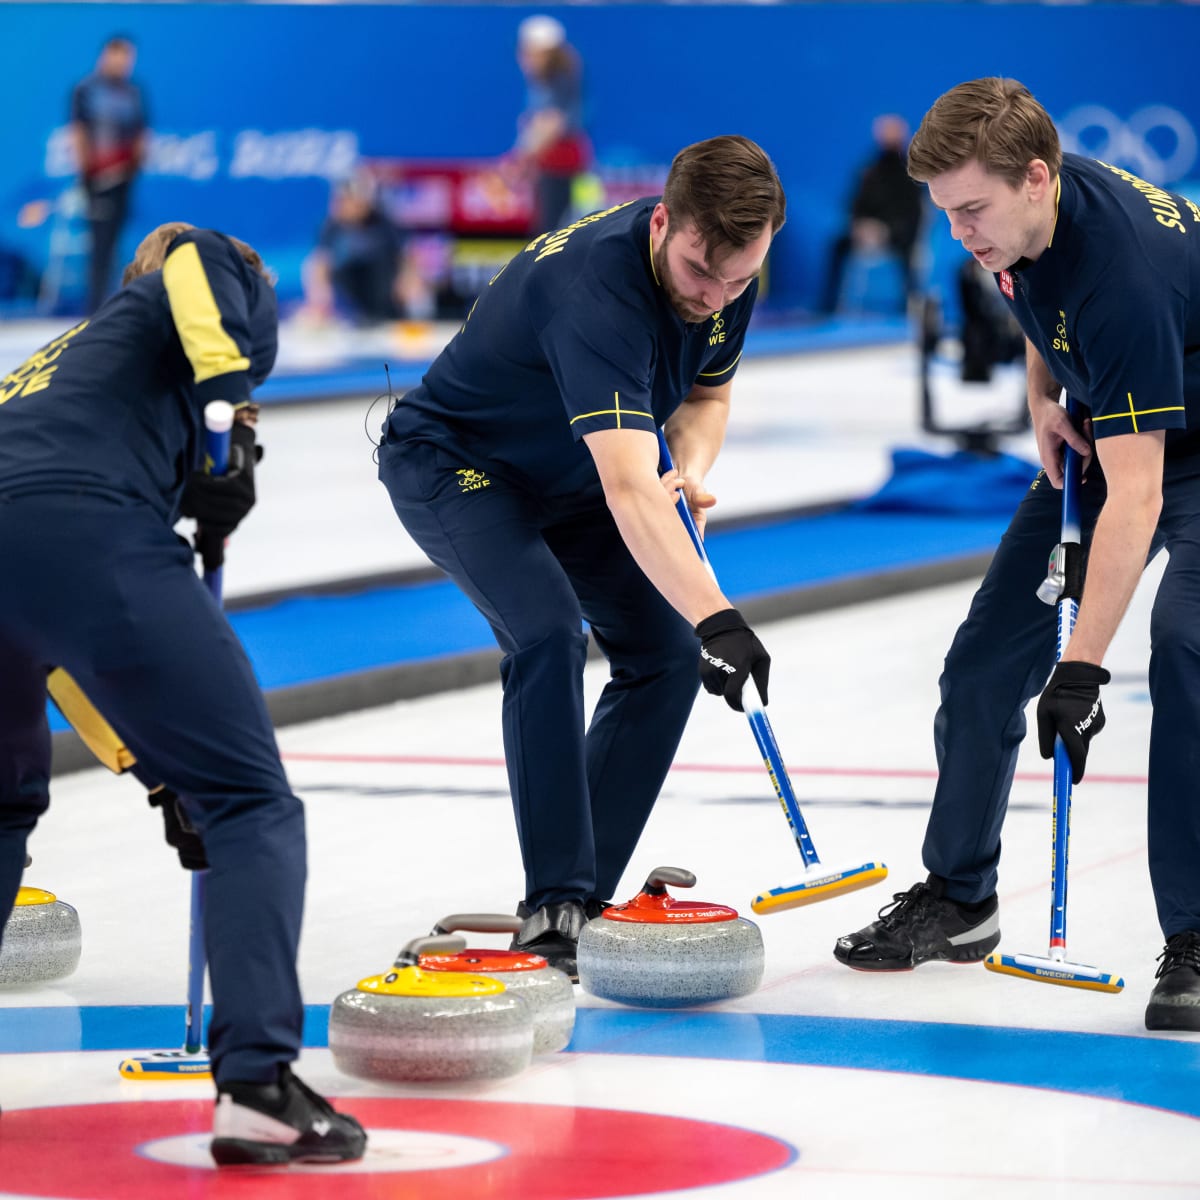 Mens World Curling Championship Scotland vs US Live Stream Watch Online - How to Watch and Stream Major League and College Sports